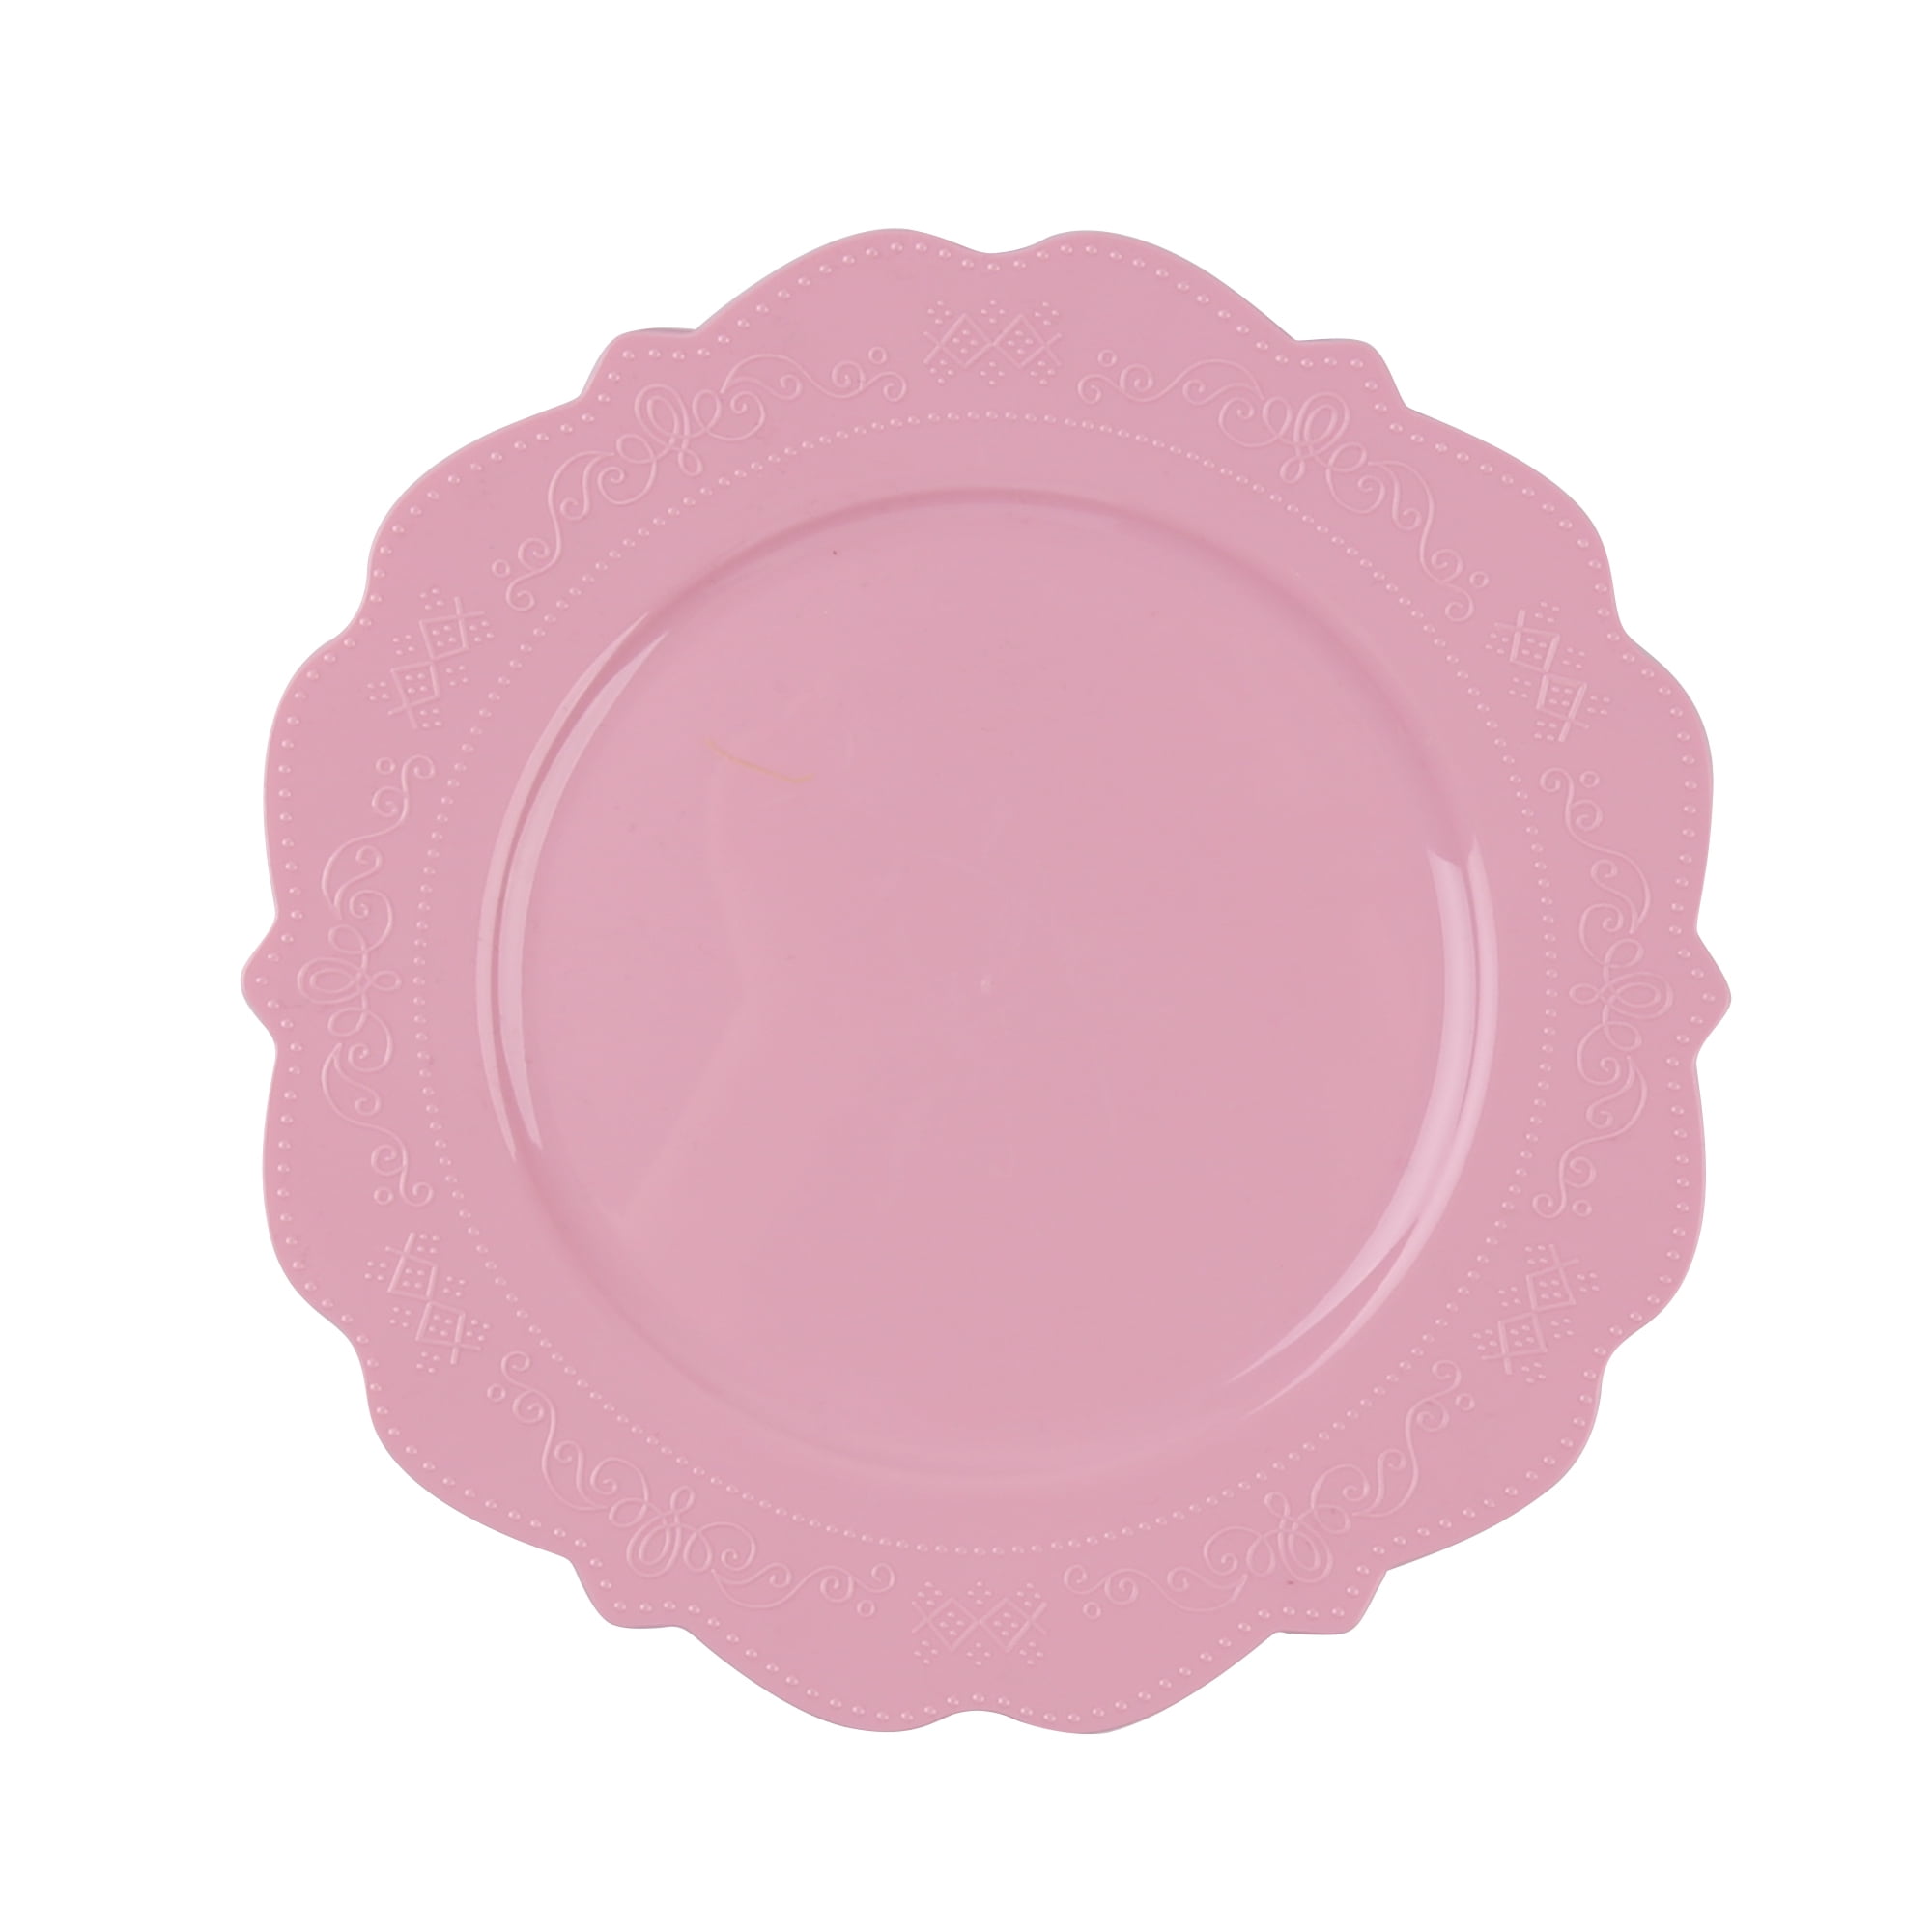 way-to-celebrate-10-elegant-pink-plates-disposable-heavy-duty-round-plastic-plates-10-ct